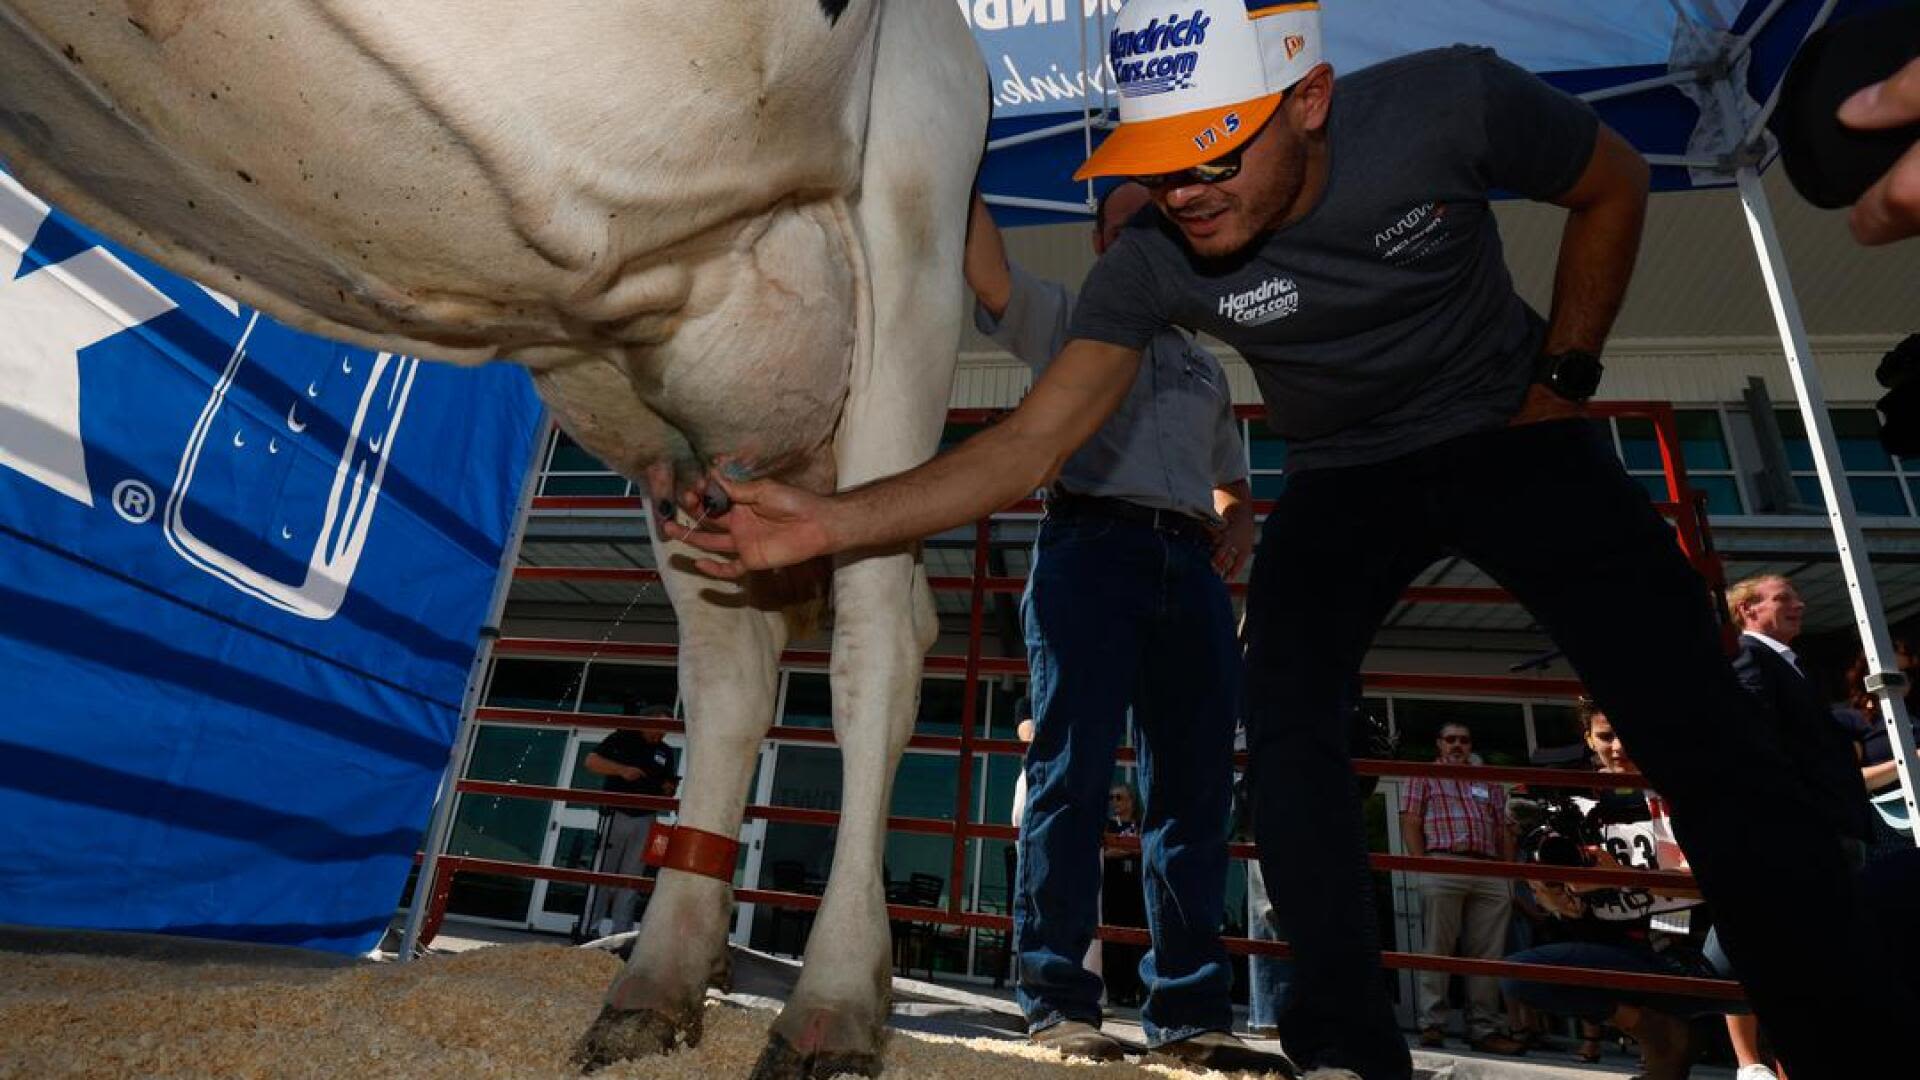 Indy 500 fastest rookie Kyle Larson milks a cow – ‘She was full of pressure and ready to release some milk.’